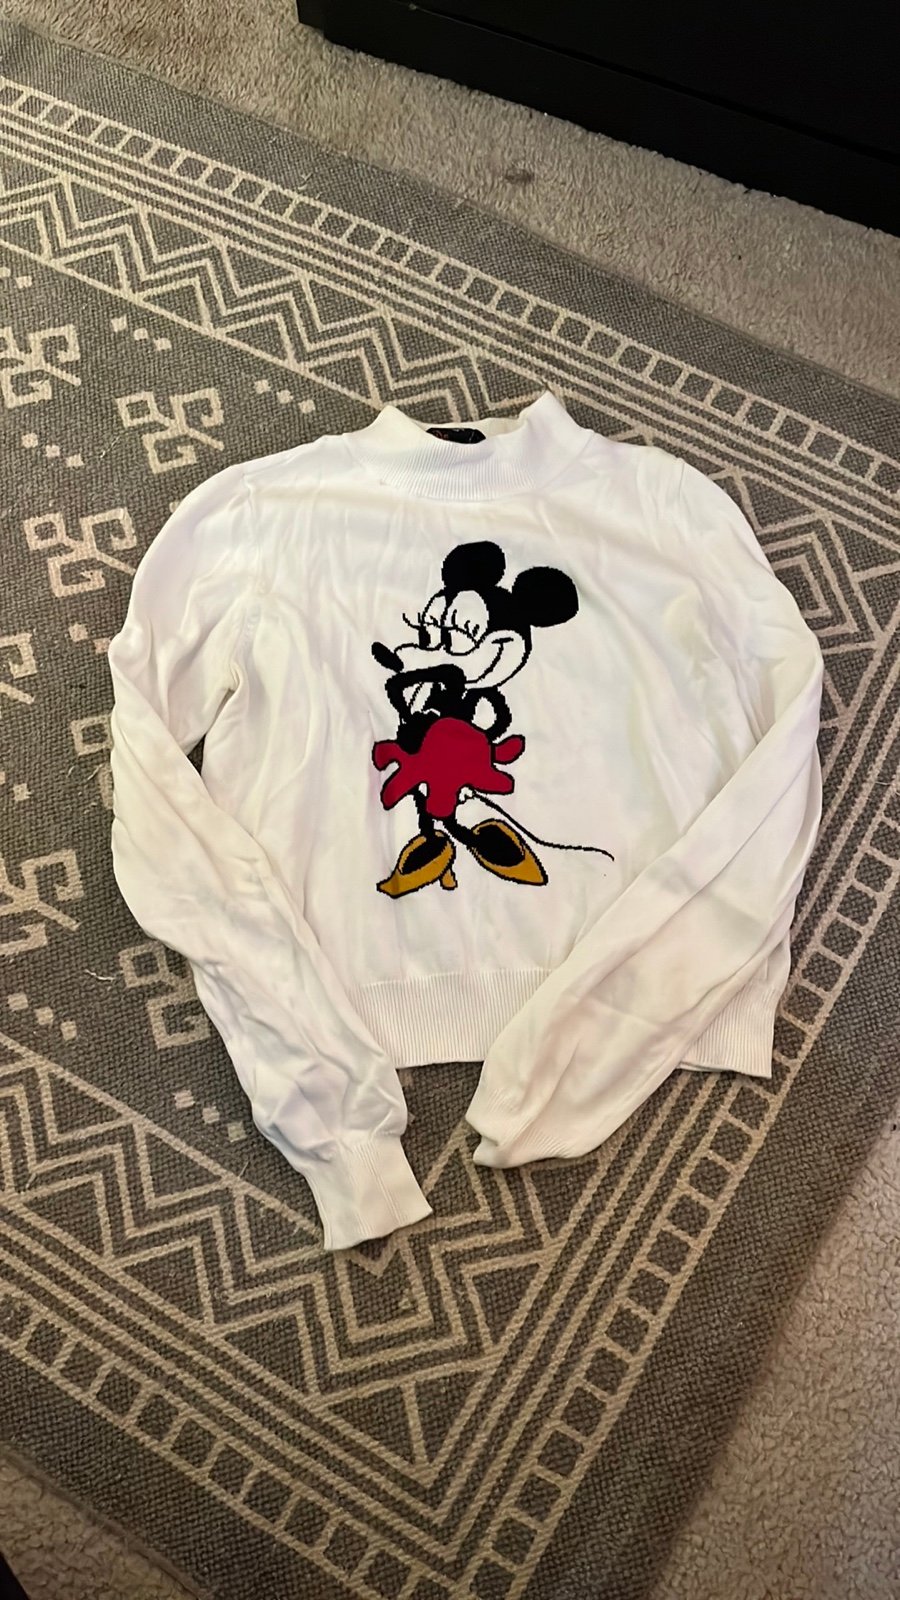 Beautiful Minnie Mouse Vintage Look Sweater hX56hVkXO G